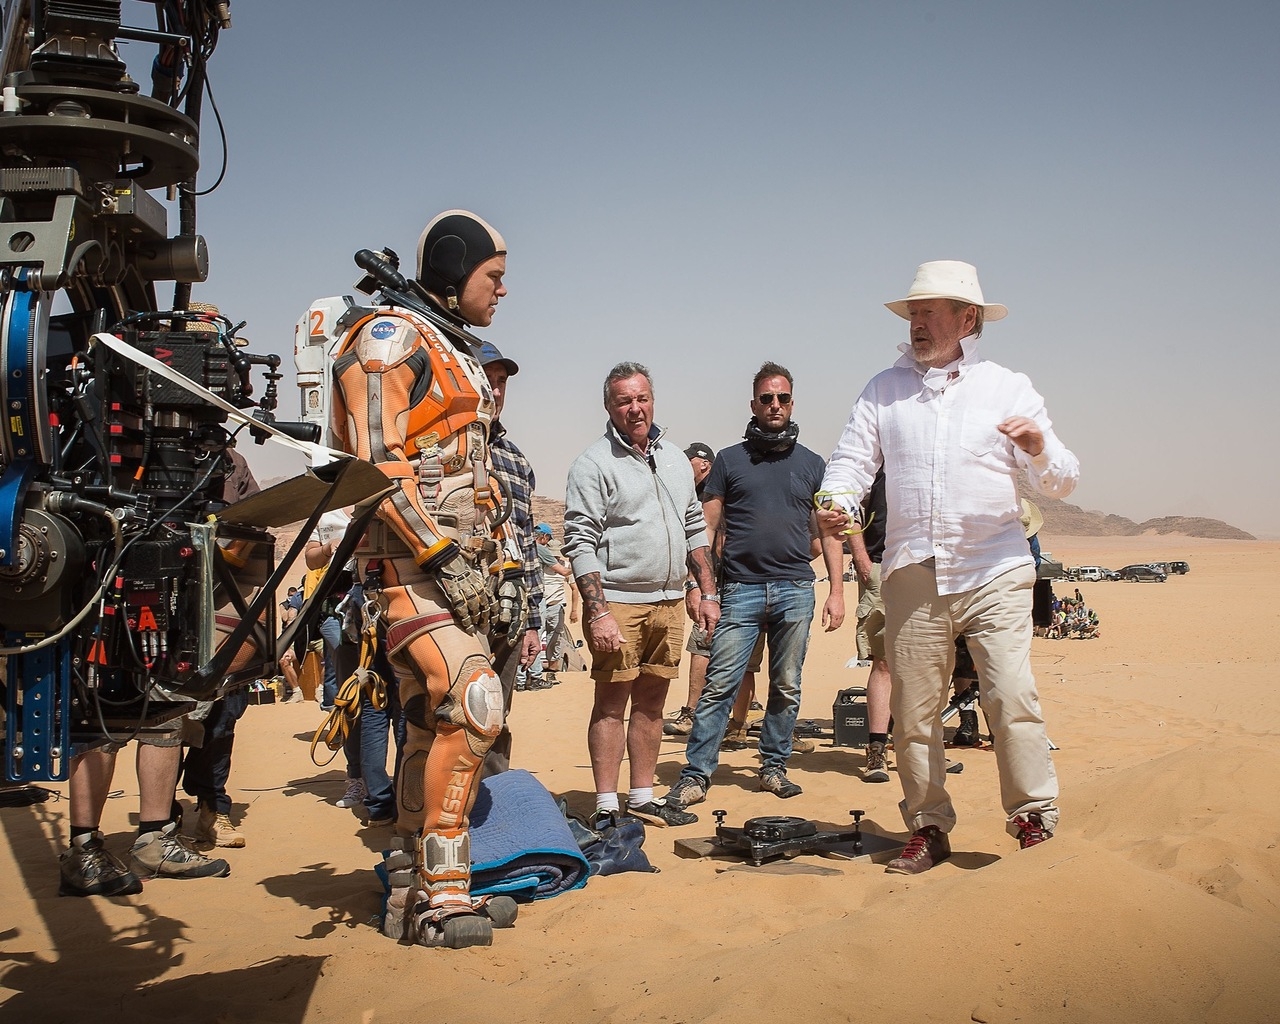 The Martian Directing for 1280 x 1024 resolution